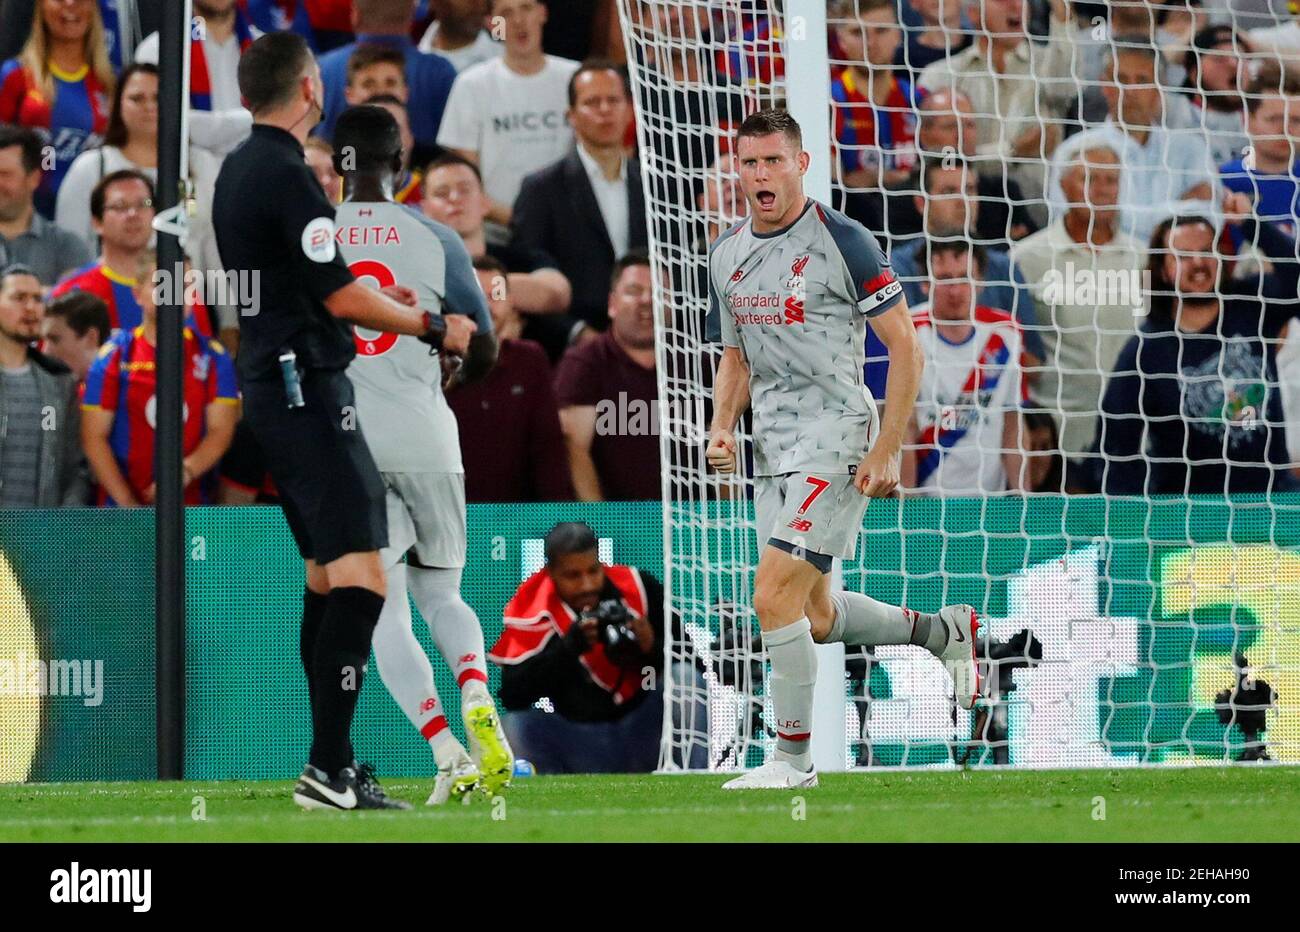 Soccer Football - Premier League - Crystal Palace v Liverpool - Selhurst Park, London, Britain - August 20, 2018  Liverpool's James Milner celebrates scoring their first goal from the penalty spot with Naby Keita                    REUTERS/Eddie Keogh  EDITORIAL USE ONLY. No use with unauthorized audio, video, data, fixture lists, club/league logos or 'live' services. Online in-match use limited to 75 images, no video emulation. No use in betting, games or single club/league/player publications.  Please contact your account representative for further details. Stock Photo